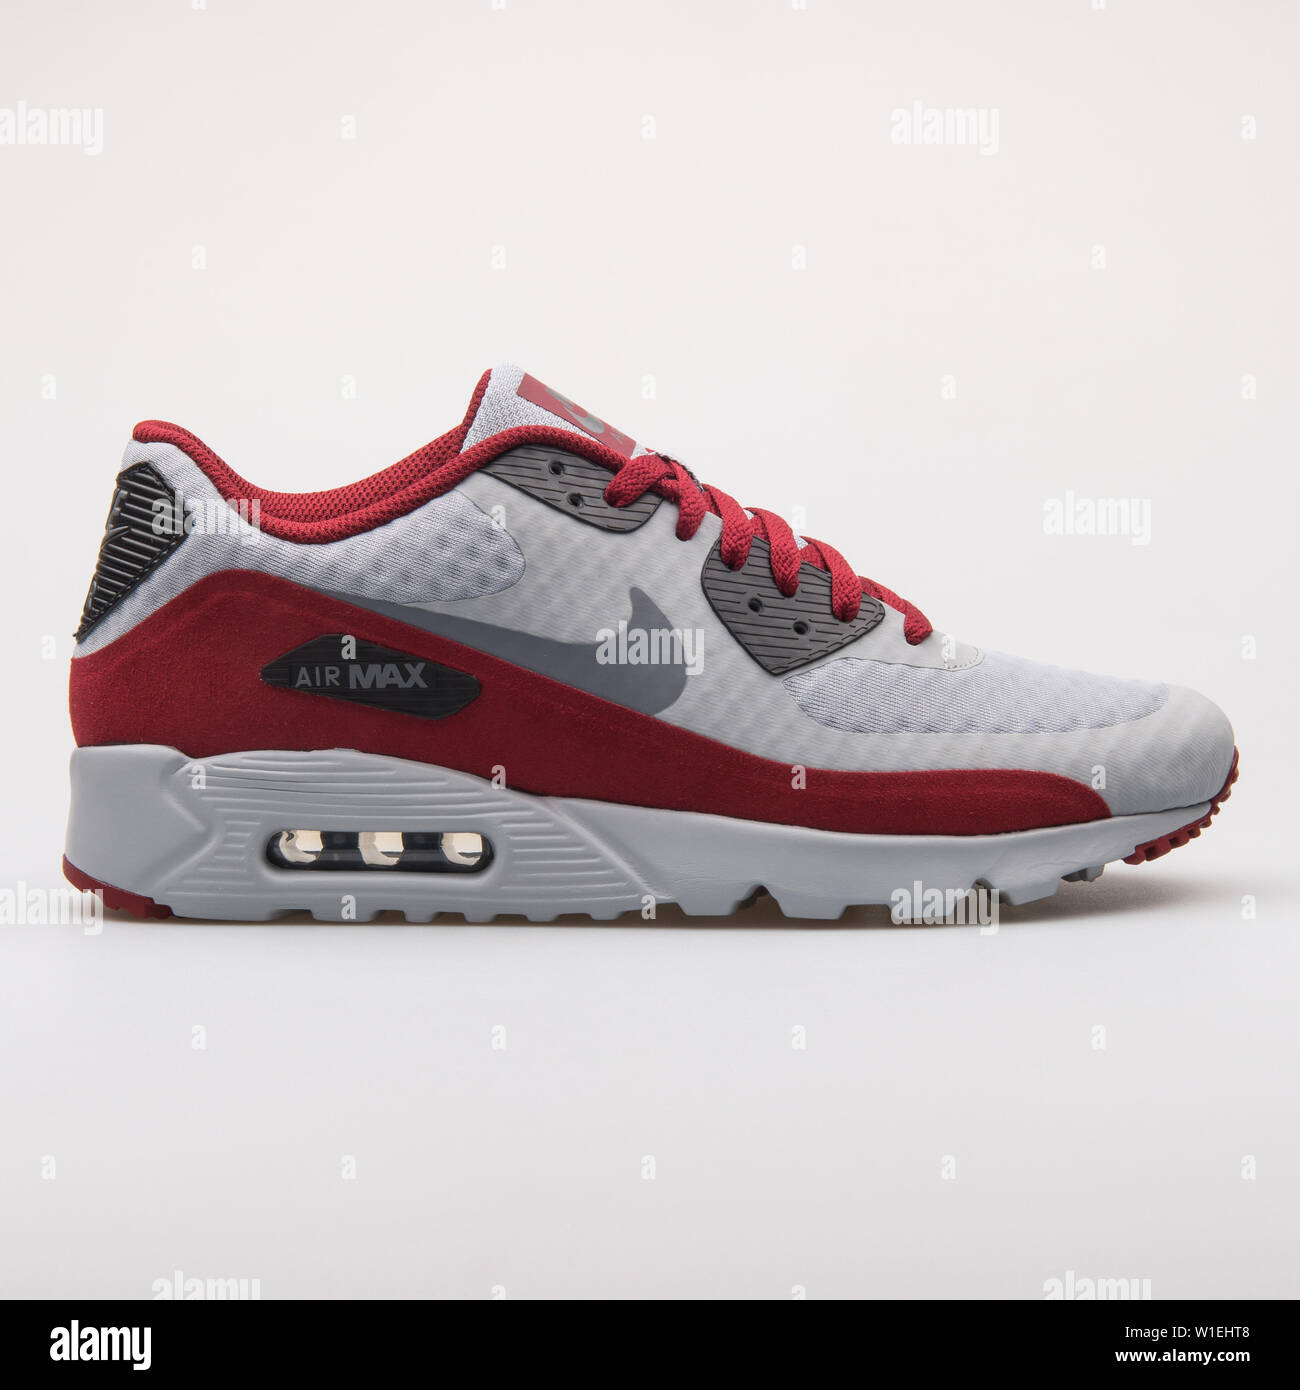 VIENNA, AUSTRIA - AUGUST 23, 2017: Nike Air Max 90 Ultra Essential grey and  red sneaker on white background Stock Photo - Alamy